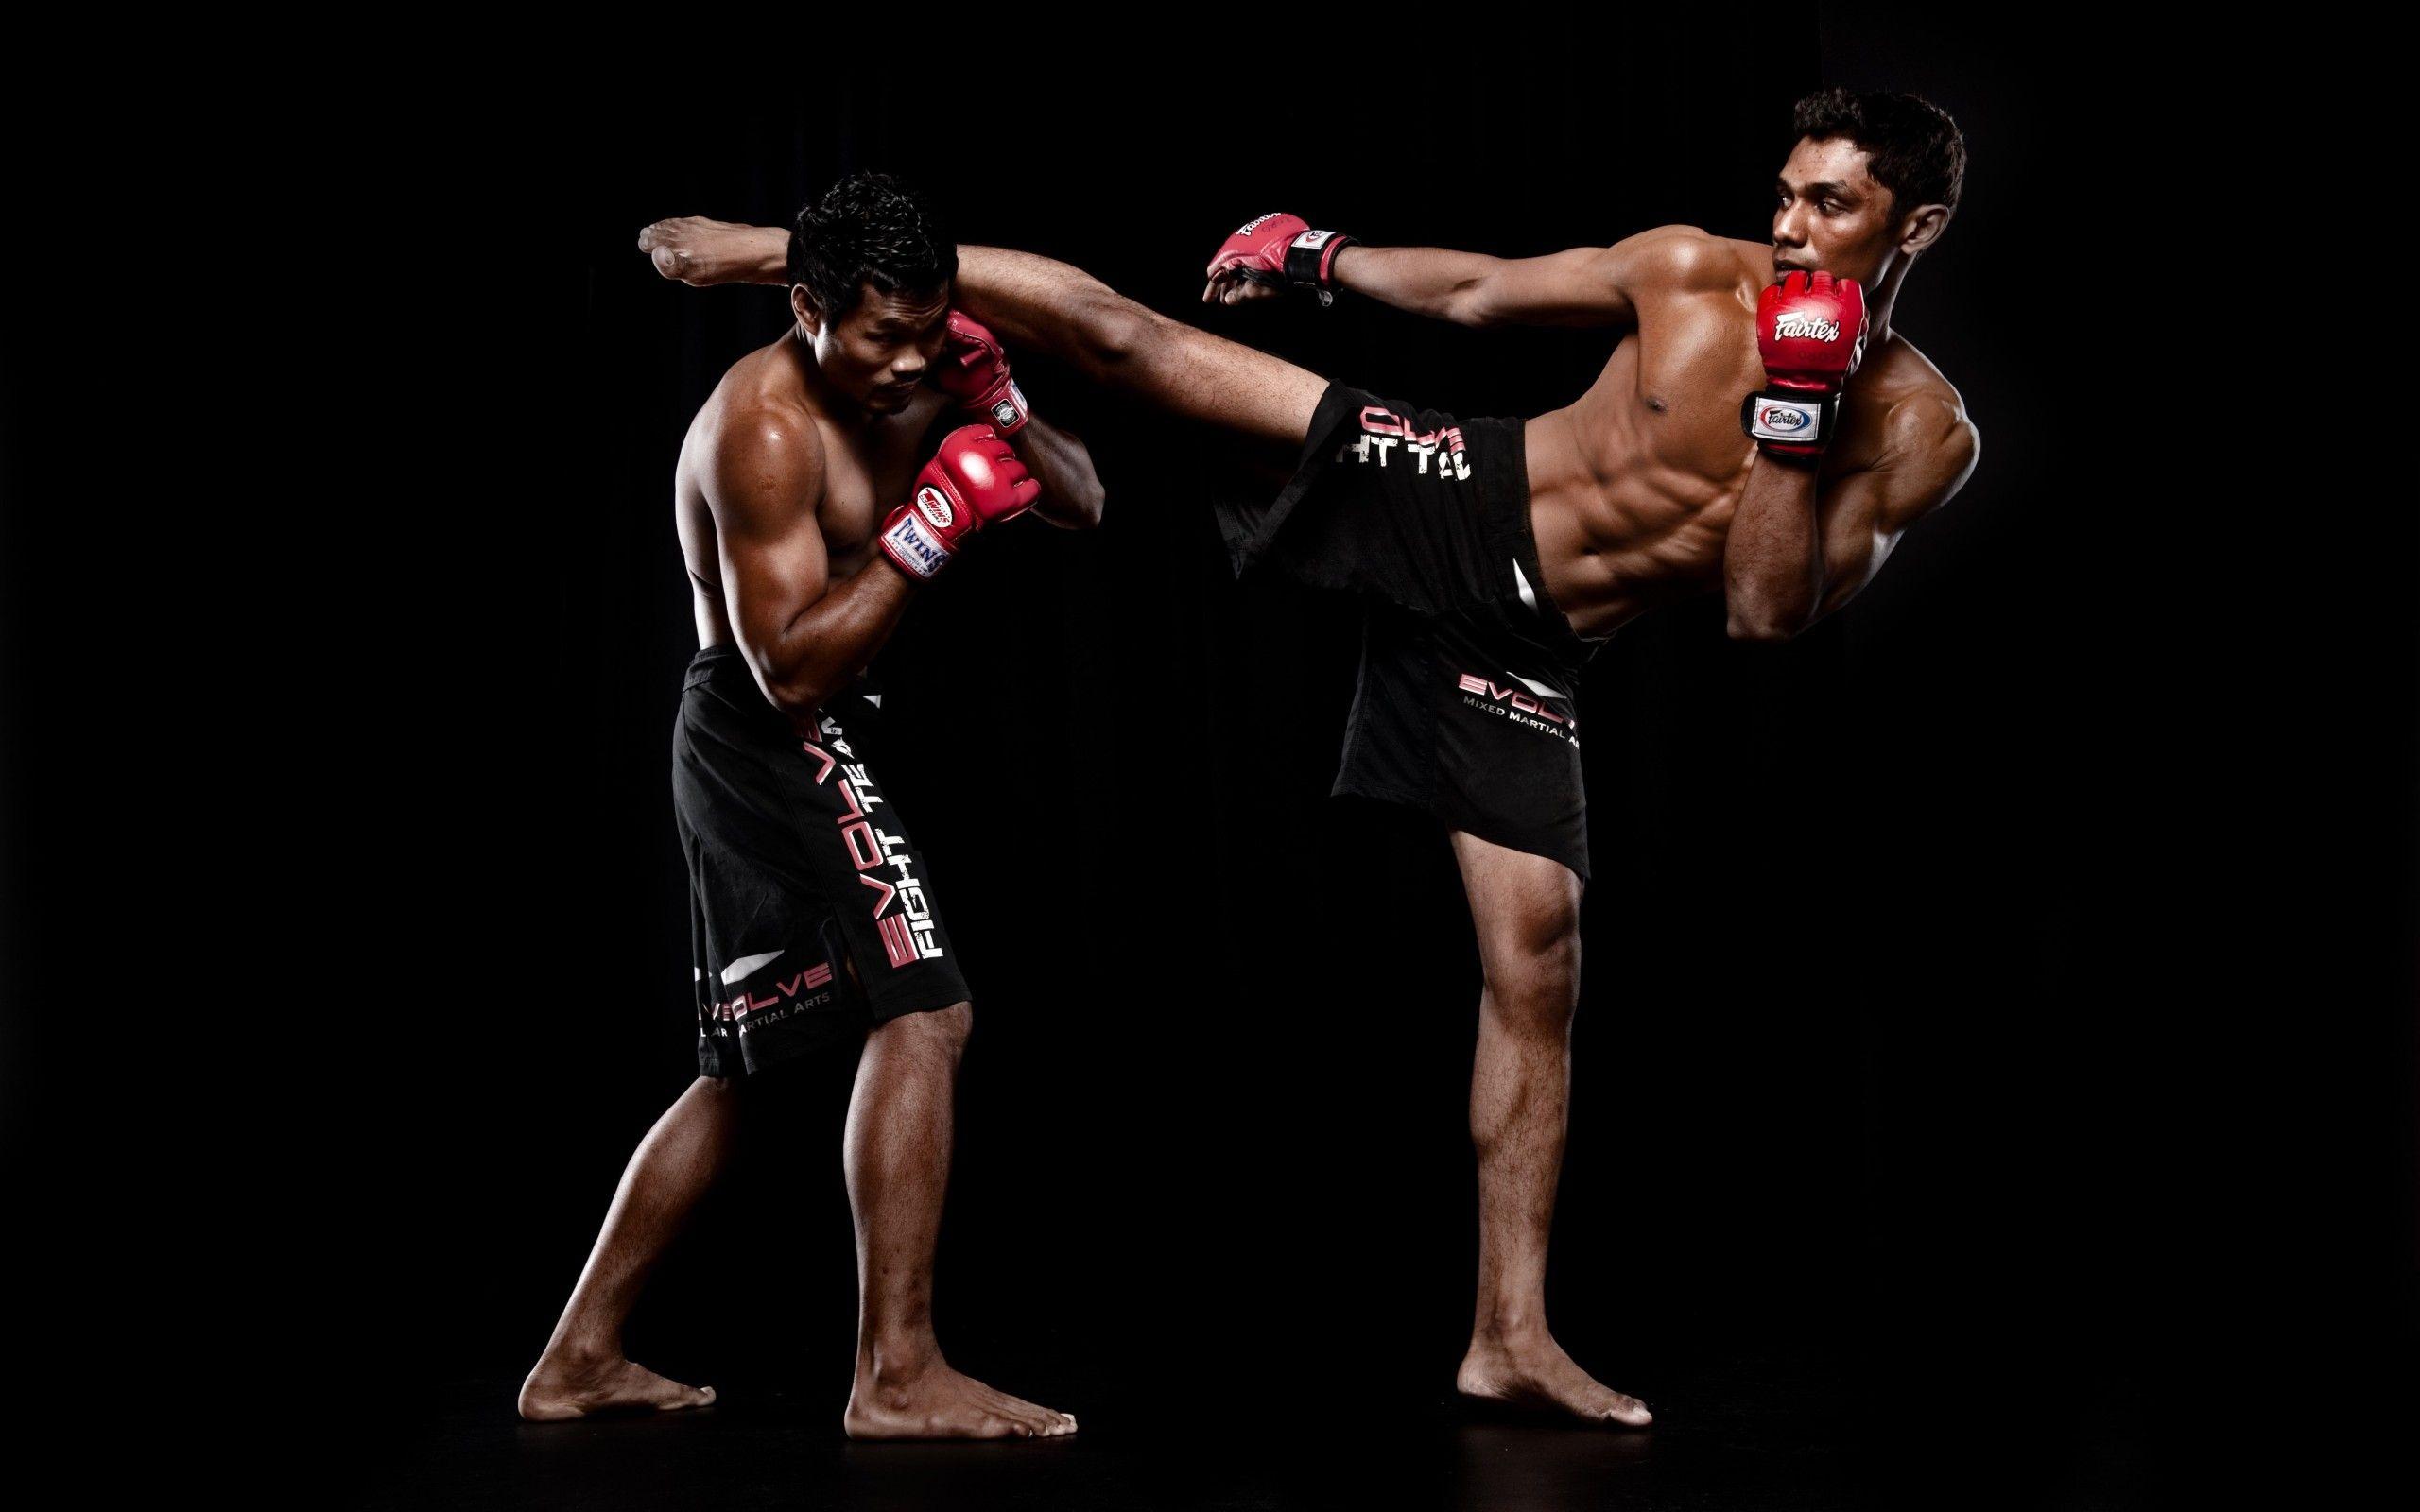 Mma Wallpaper HD Background, Image, Pics, Photo Free Download